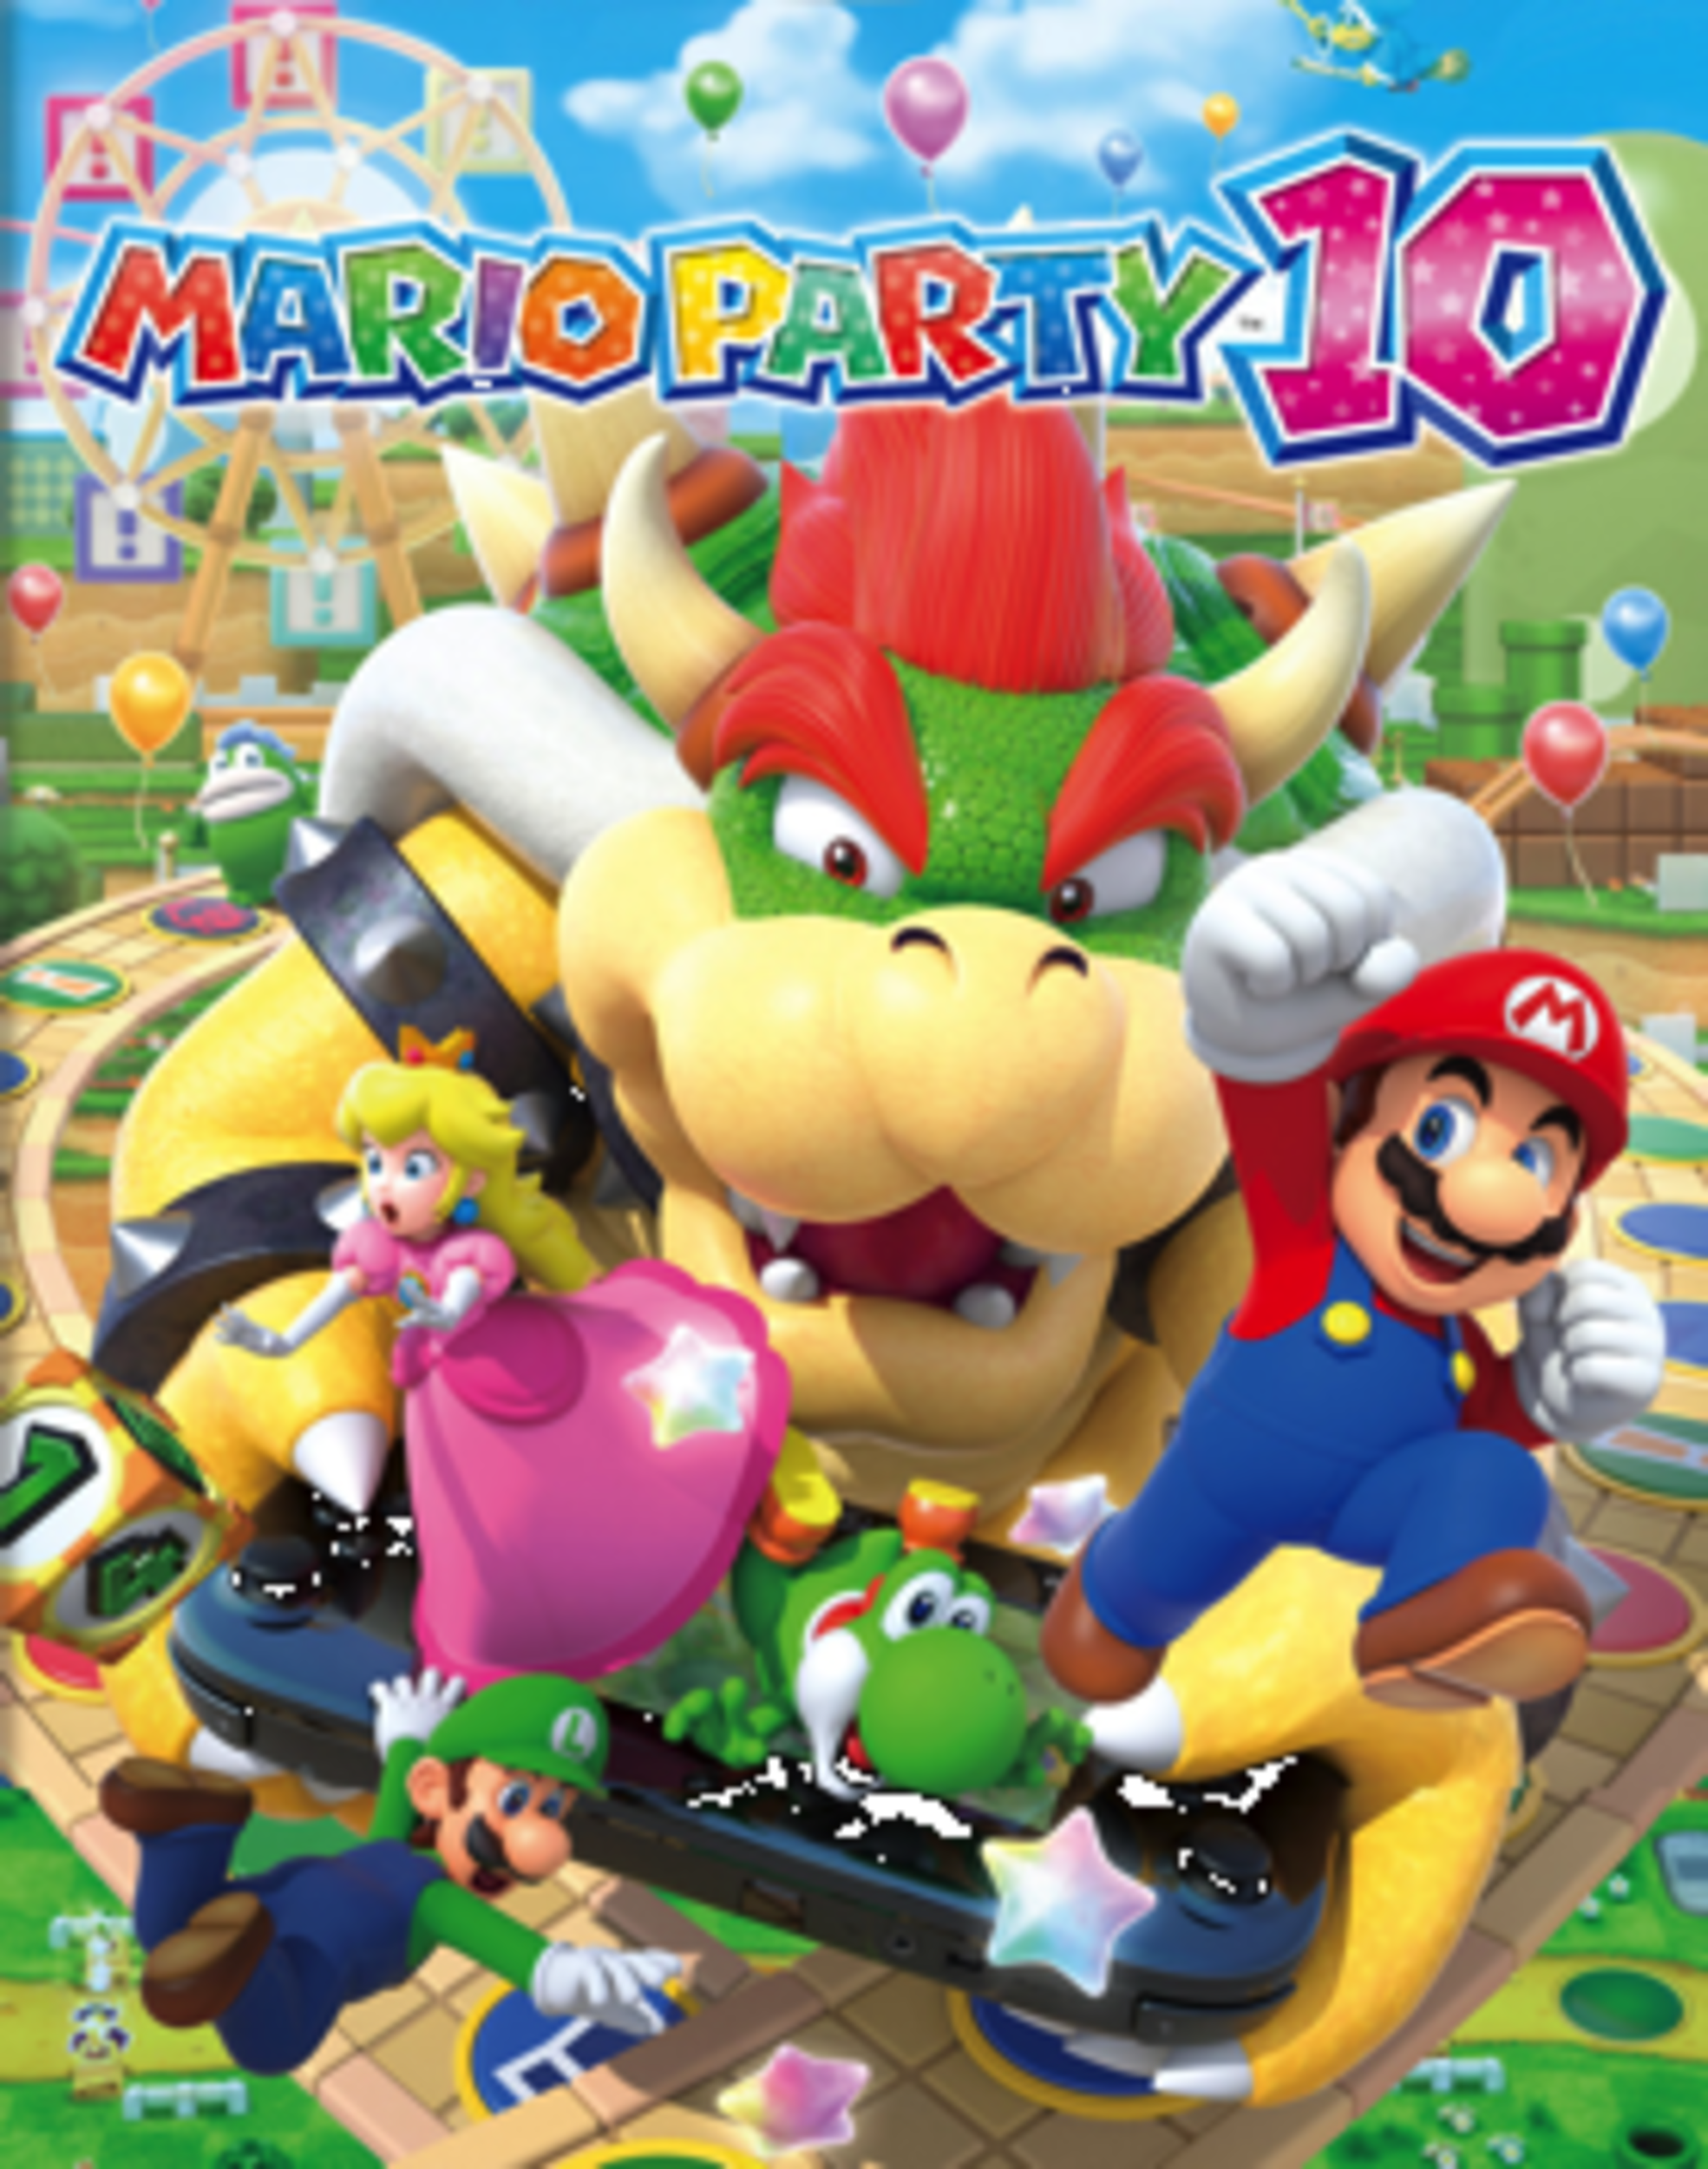 <p>It's hard to make a game that becomes a best-selling franchise. It's even harder to make a whole new franchise within a gaming franchise, but the <em>Mario Party</em> games did just that for nine whole games. Then, this one came along. </p><p>The <em>Mario Party</em> games are precisely what the title implies. They are party-style games where players move various Mario characters around a board to rack up coins with a mix of lucky die-rolling and a ton of super fun mini-games. Then, for some reason, the makers of <em>Mario Party 10</em> decided the whole concept needed to be reinvented for the failing Wii U console.</p><p>Sure, you could use your Amiibo figures to plug them into the game, but whether you use your own or the game's roster of characters, there's not much for them to do since the gameboard are so boring, and the mini-games feel like a copy and paste of the coding into new settings and formats. </p><p><a href='https://www.msn.com/en-us/community/channel/vid-cj9pqbr0vn9in2b6ddcd8sfgpfq6x6utp44fssrv6mc2gtybw0us'>Follow us on MSN to see more of our exclusive entertainment content.</a></p>